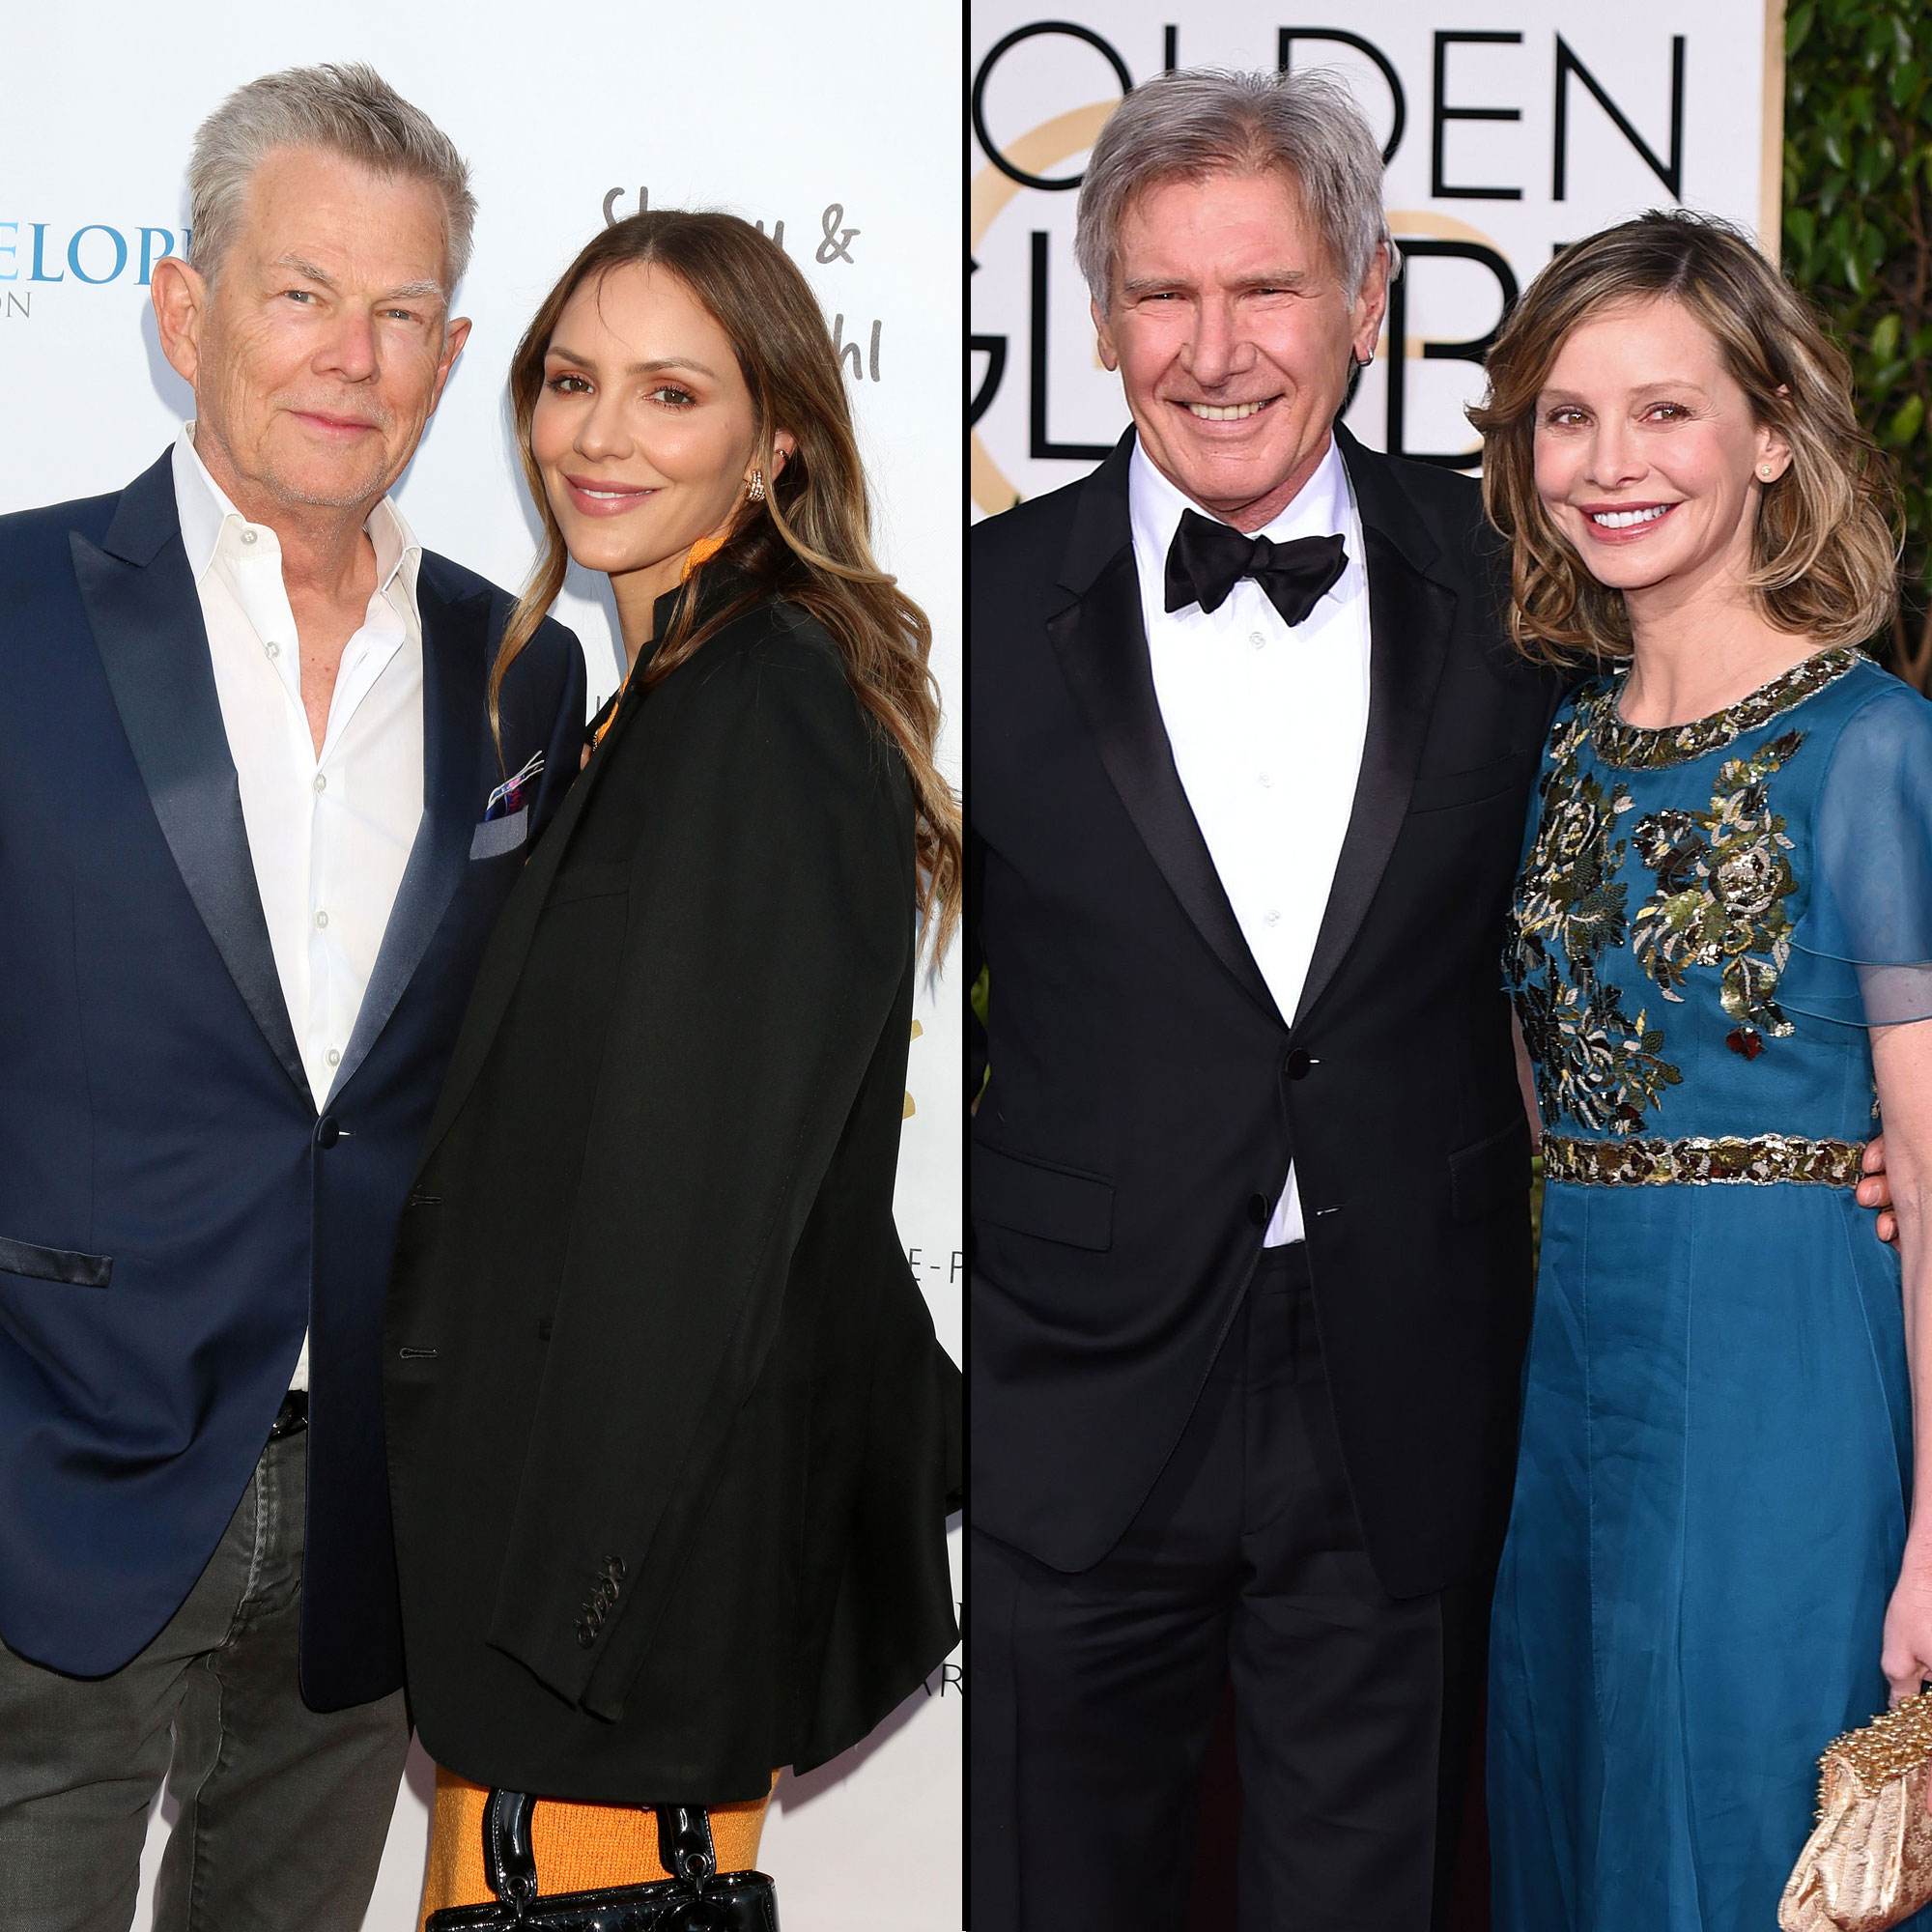 13 On-Screen Couples Whose Age Gaps Will Shock You